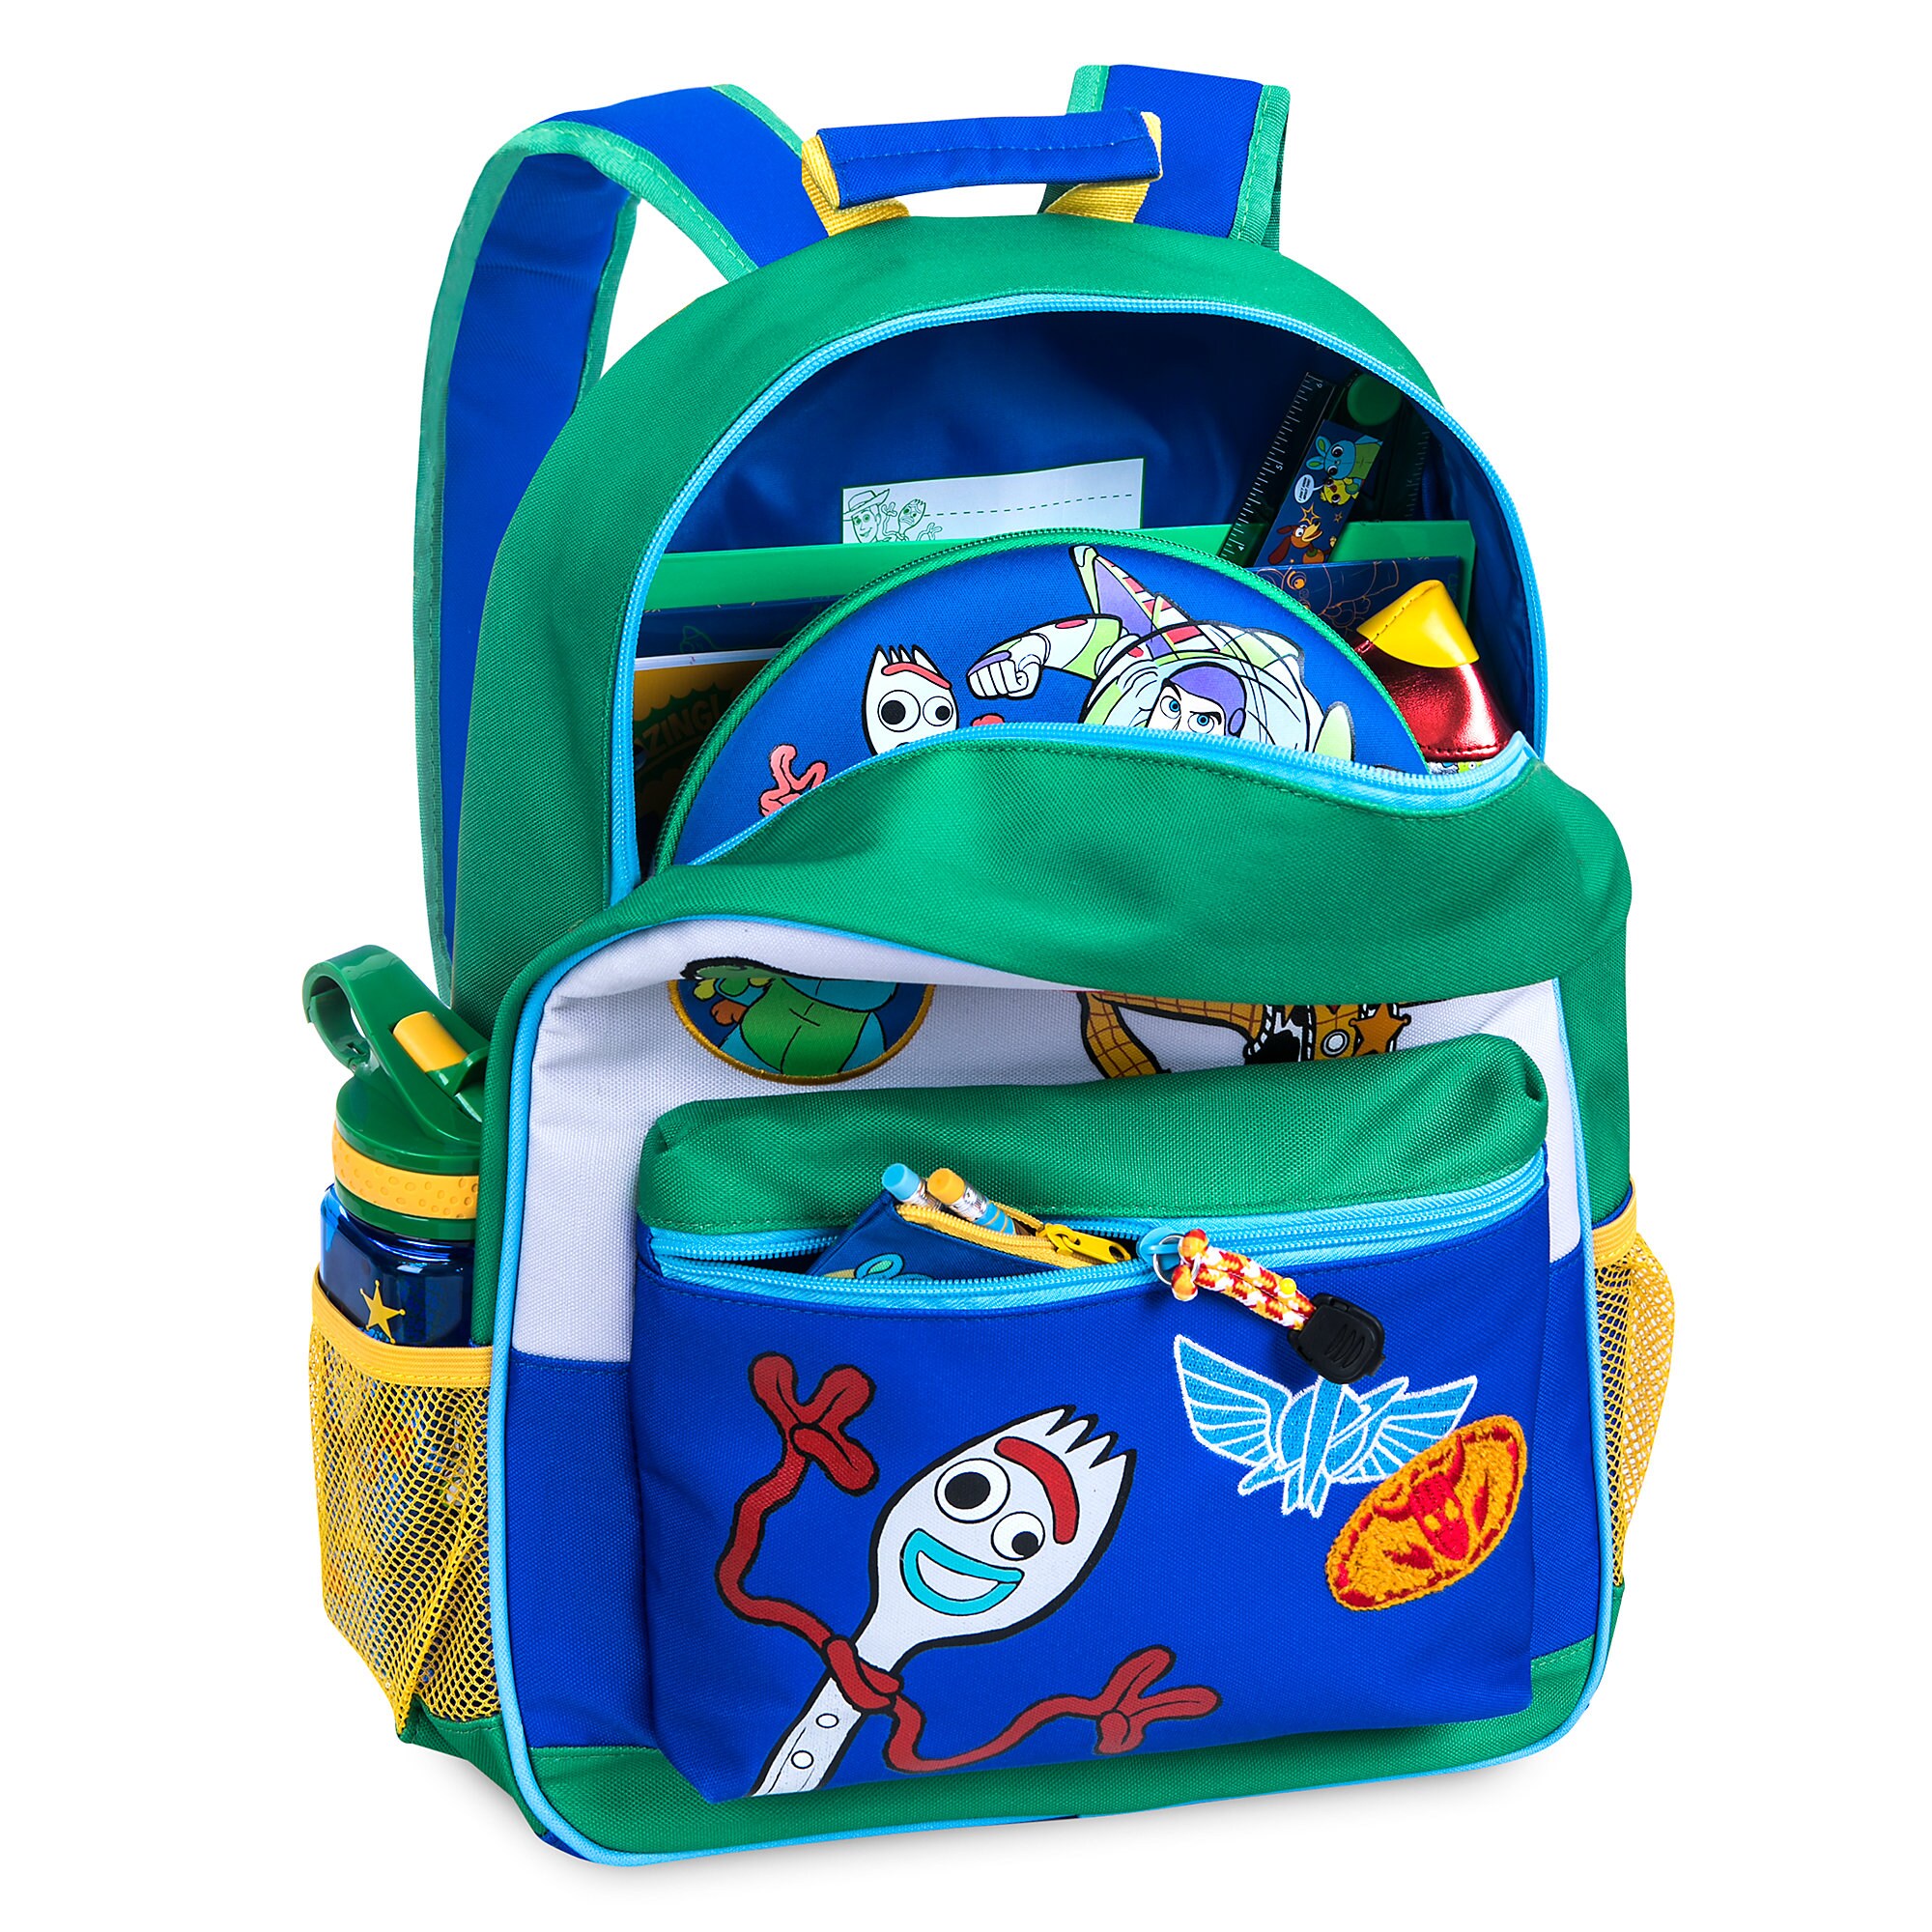 Toy Story 4 Backpack - Personalized